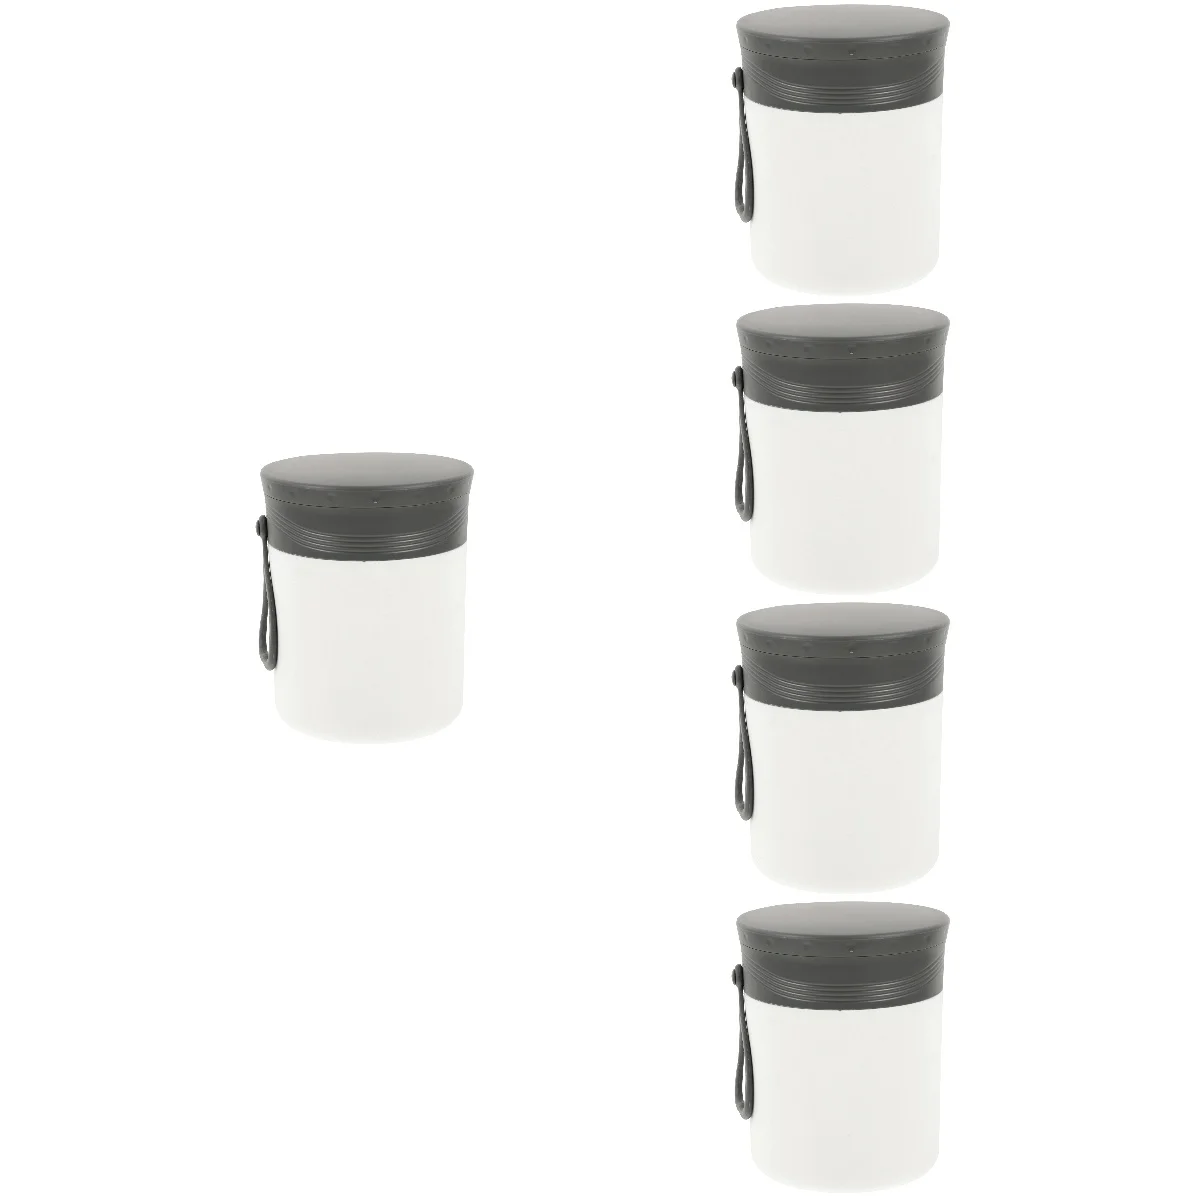 

5x Practical Multi-function Creative Convenient Insulated Jar Insulation Soup Cup Breakfast Cup for School Office Home